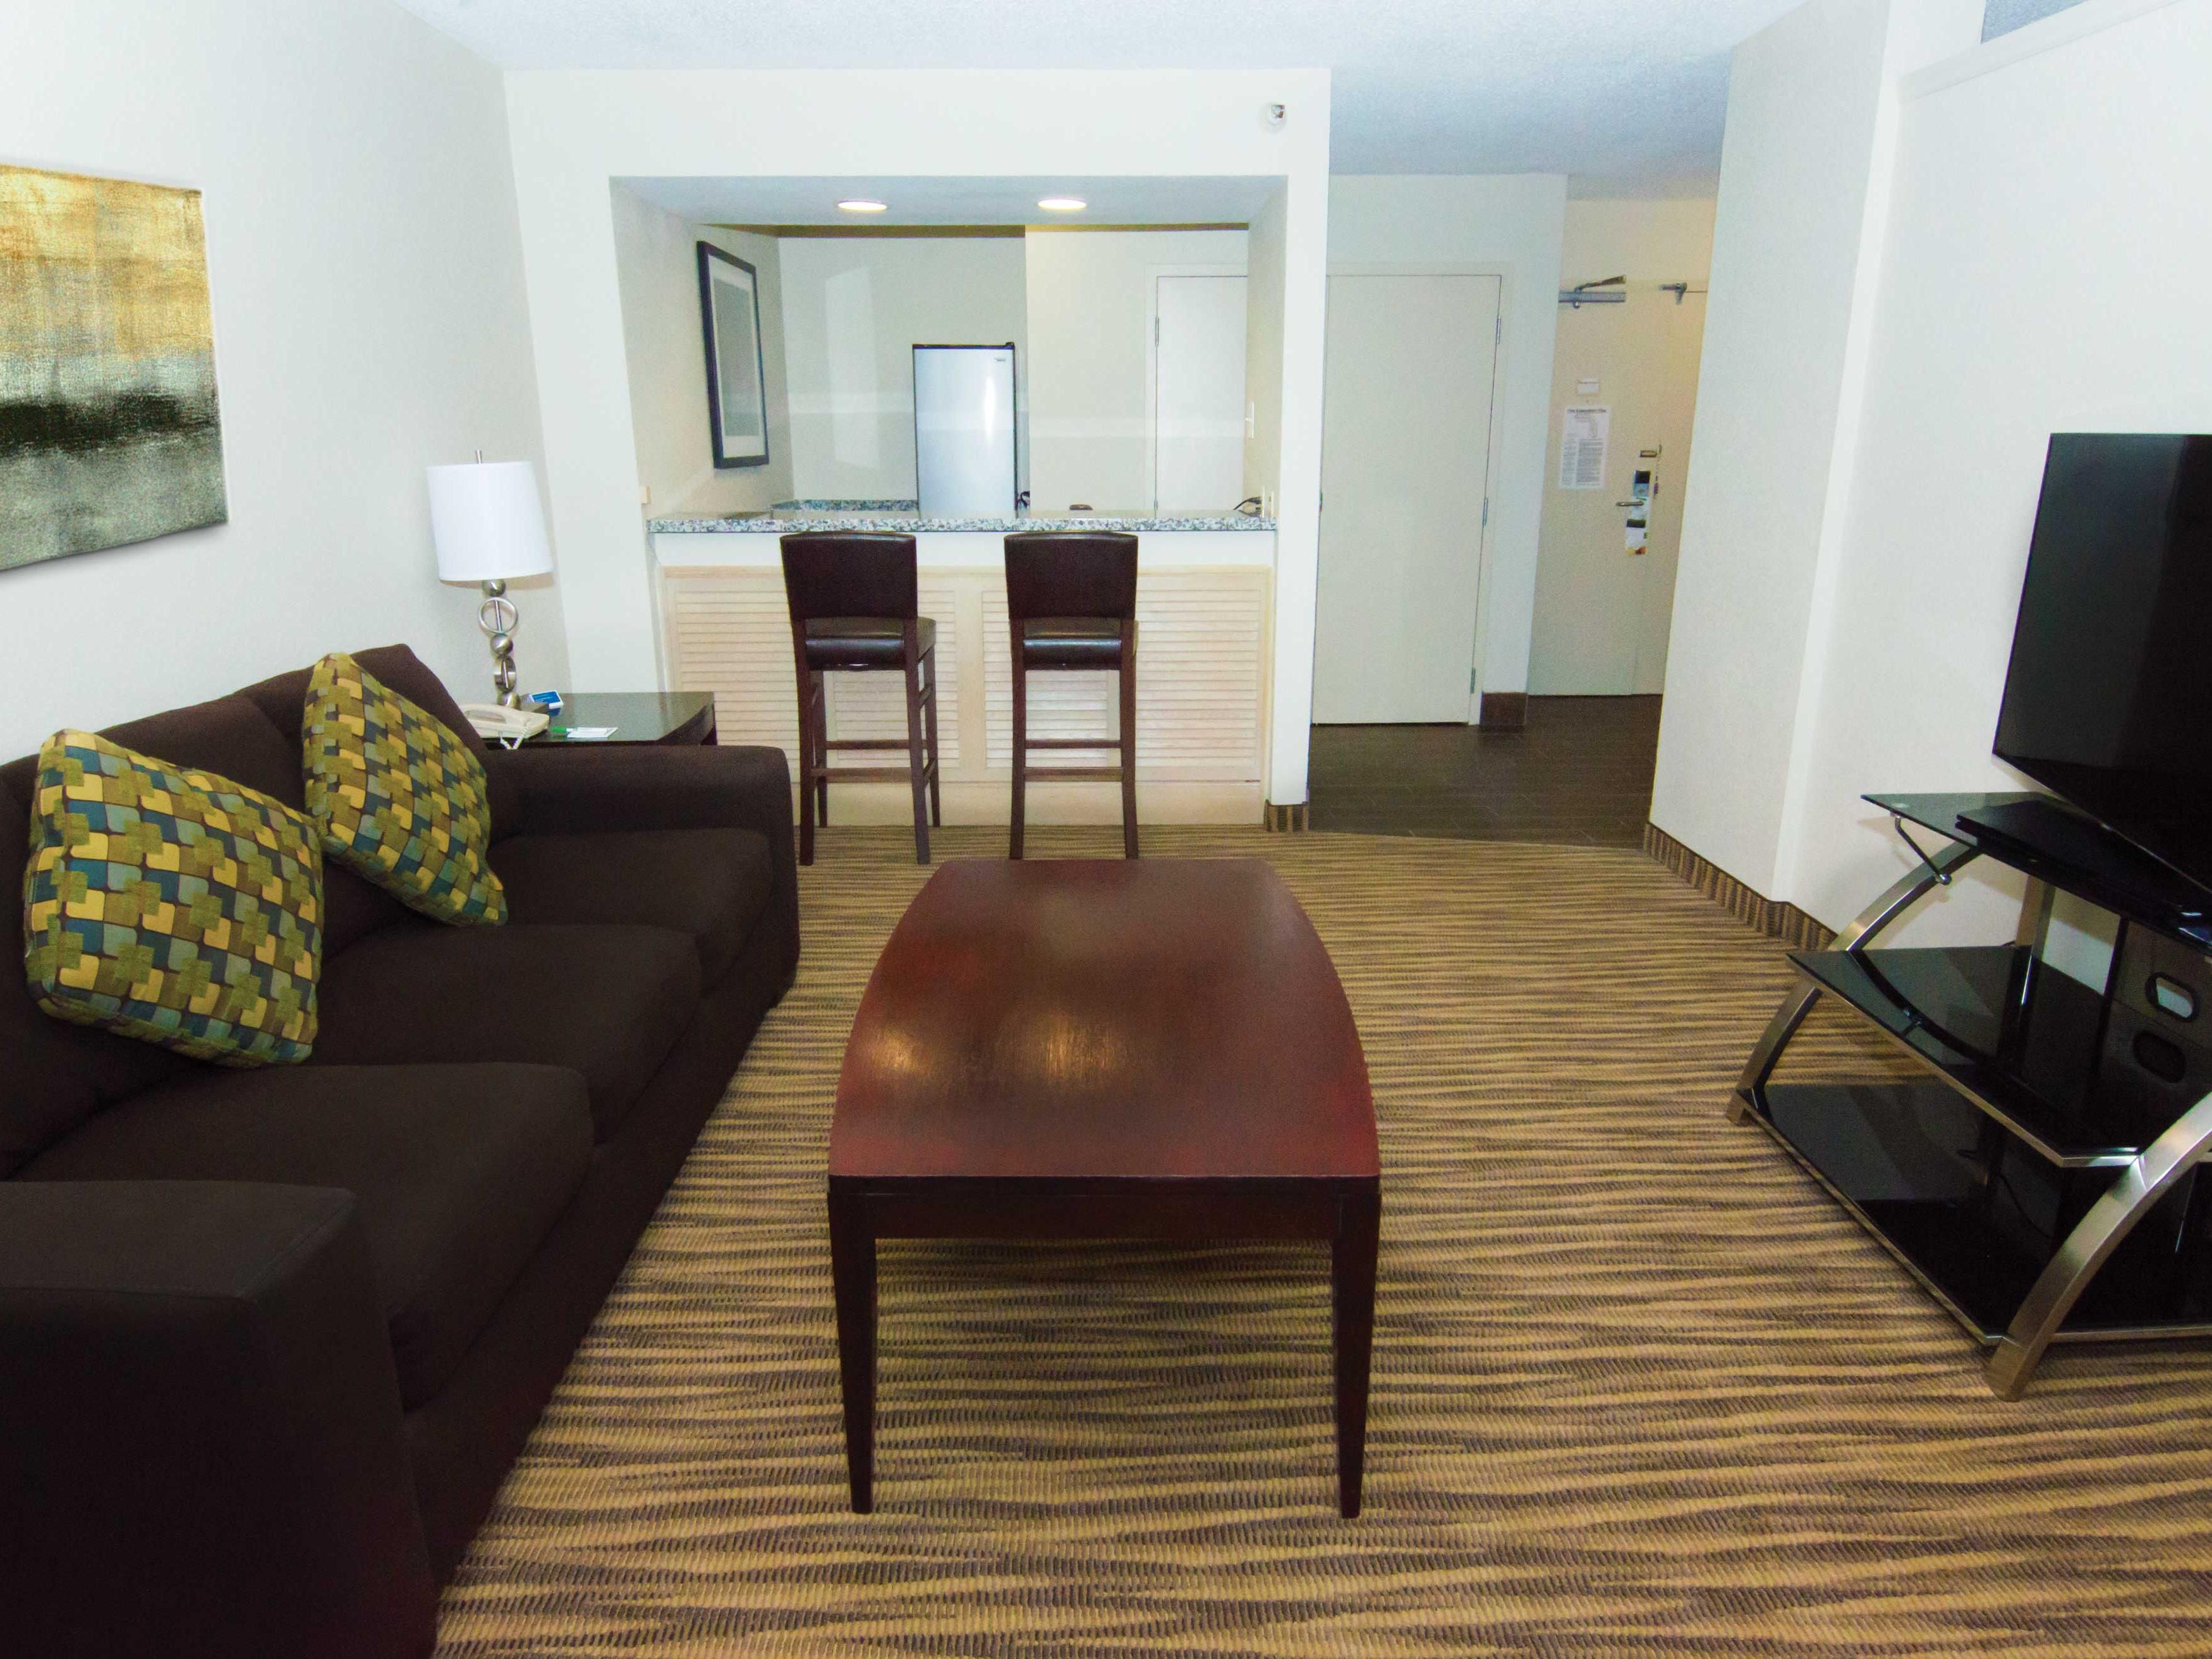 Whether you are hosting a special occasion, have the extended family or nanny with you or are staying a longer length of time (up to 35% off - inquire about our special rates), we have a suite for you. Ask about the various options today.